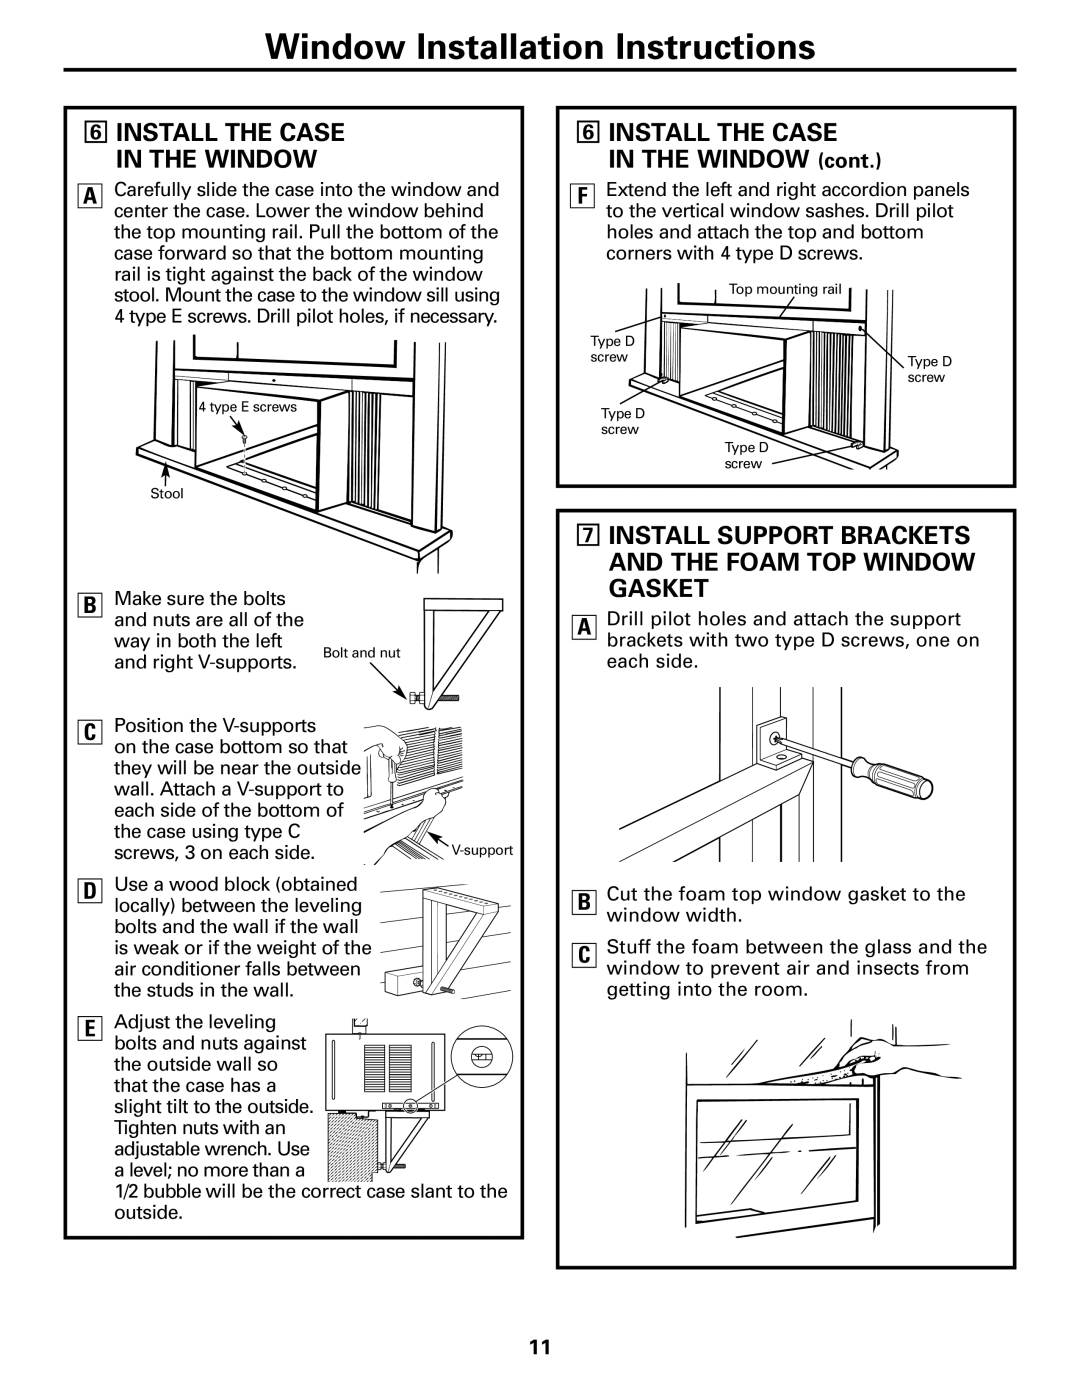 GE AEE18 owner manual 6INSTALL THE CASE IN THE WINDOW cont, Window Installation Instructions 